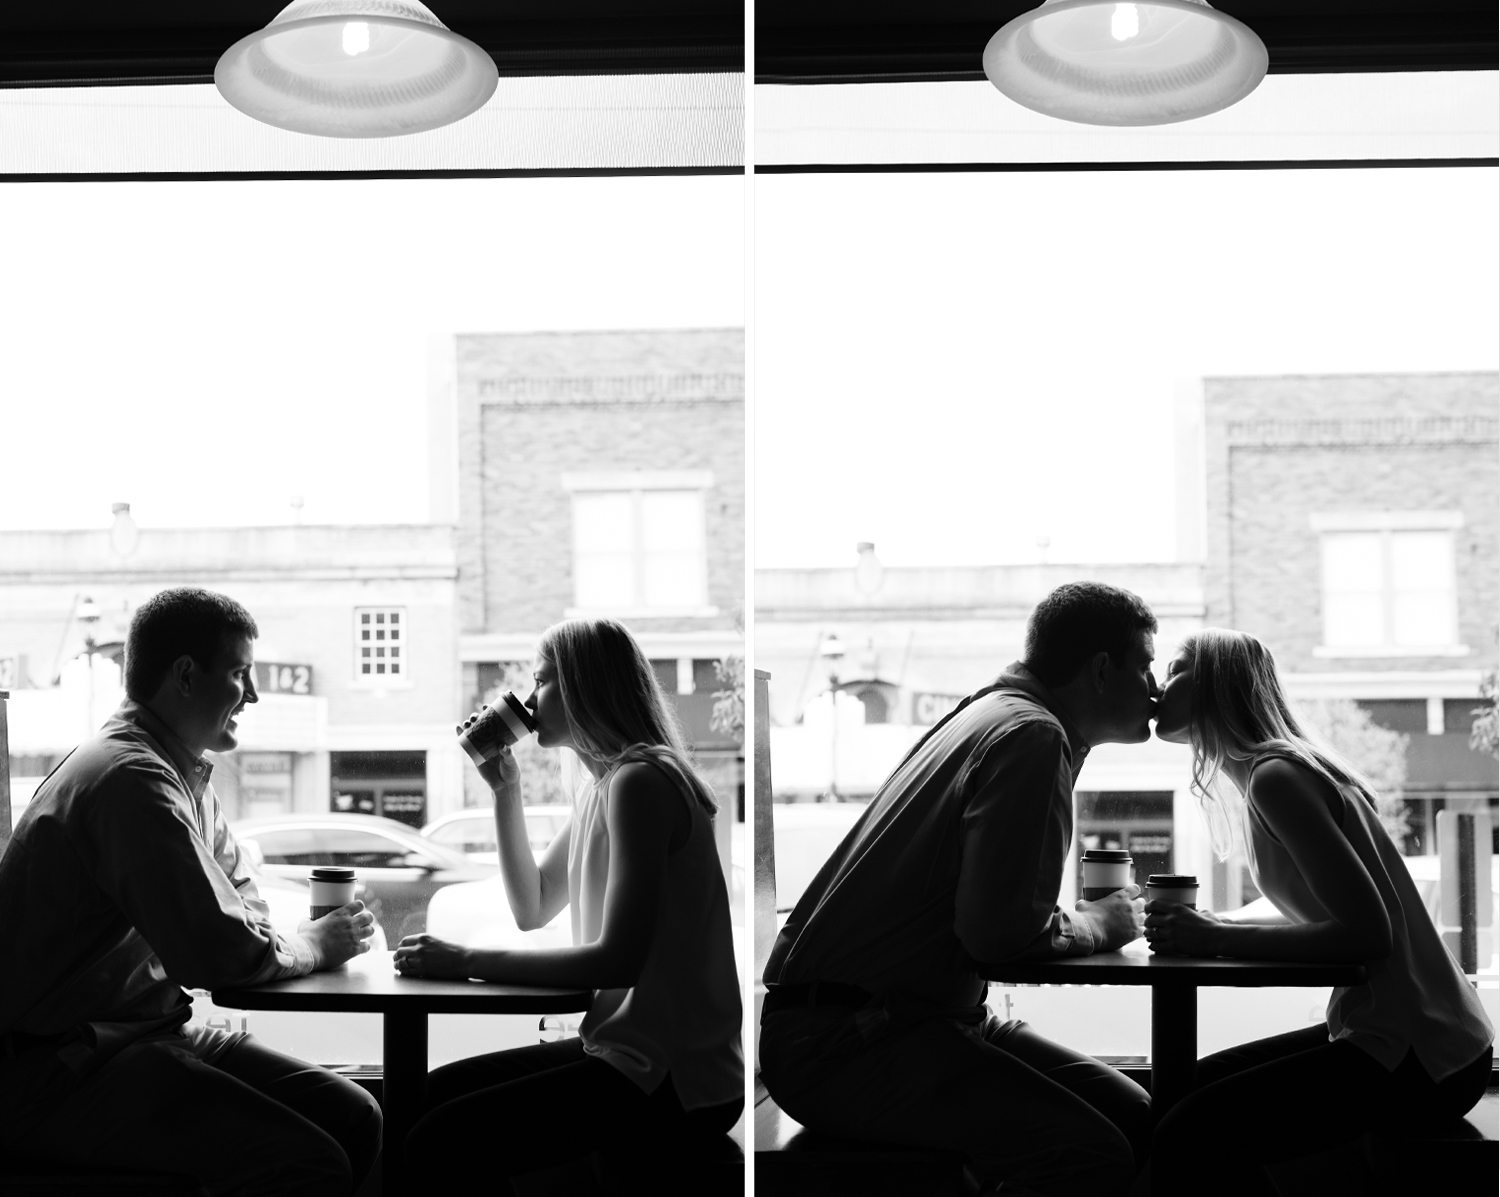  Greenville Ohio, coffee and a date, modern engagement photography, black and white photography, storytelling photography,&nbsp; The Coffee Pot, lifestyle engagement photography 